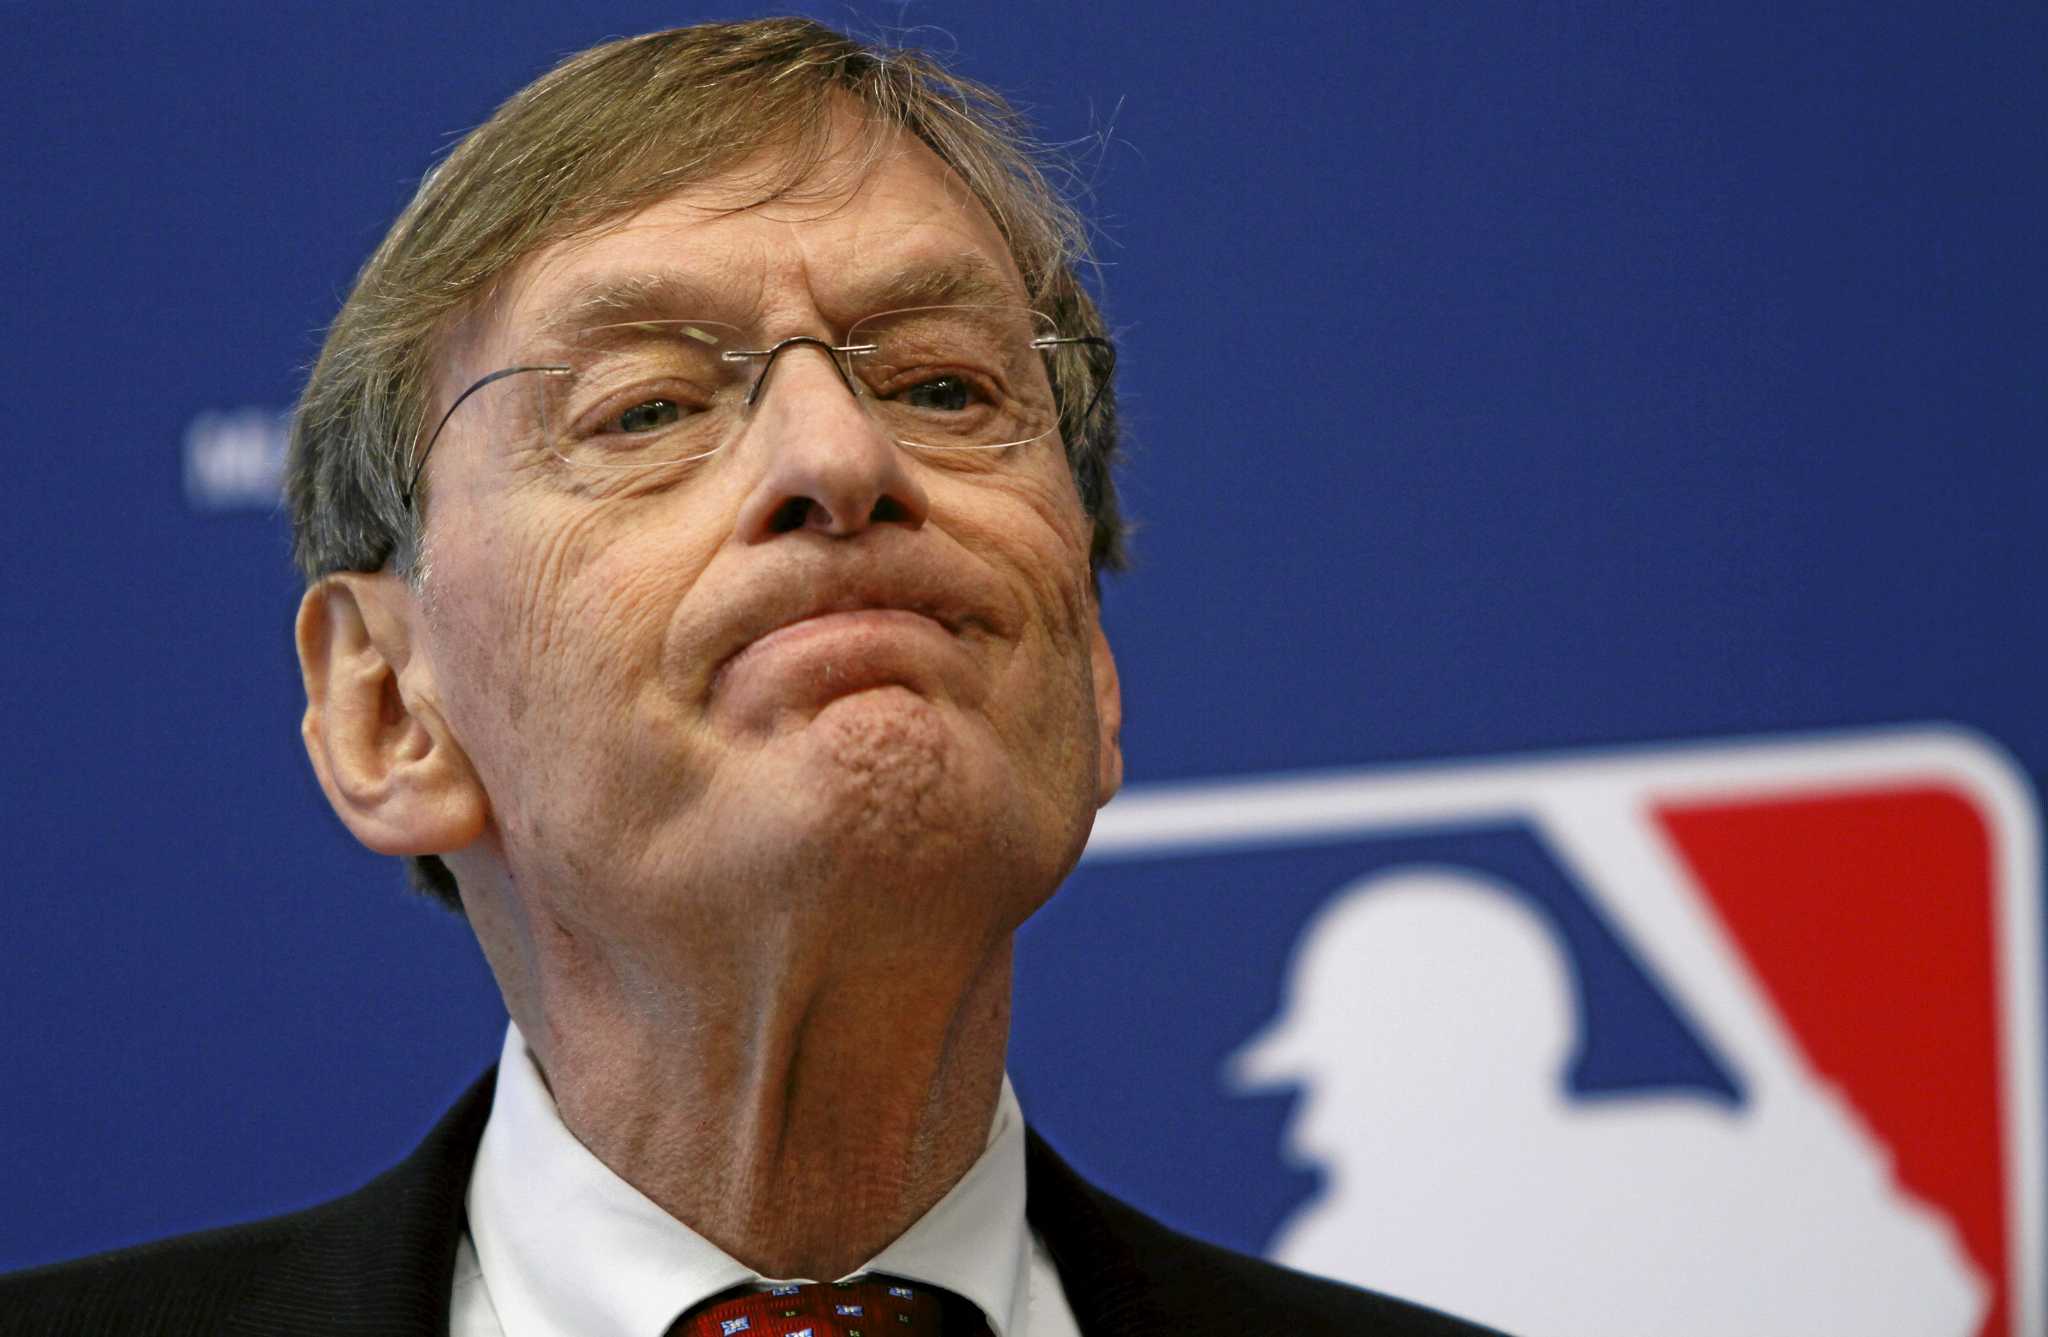 Bud Selig, Once the Commissioner, Is Back to Being a Brewers